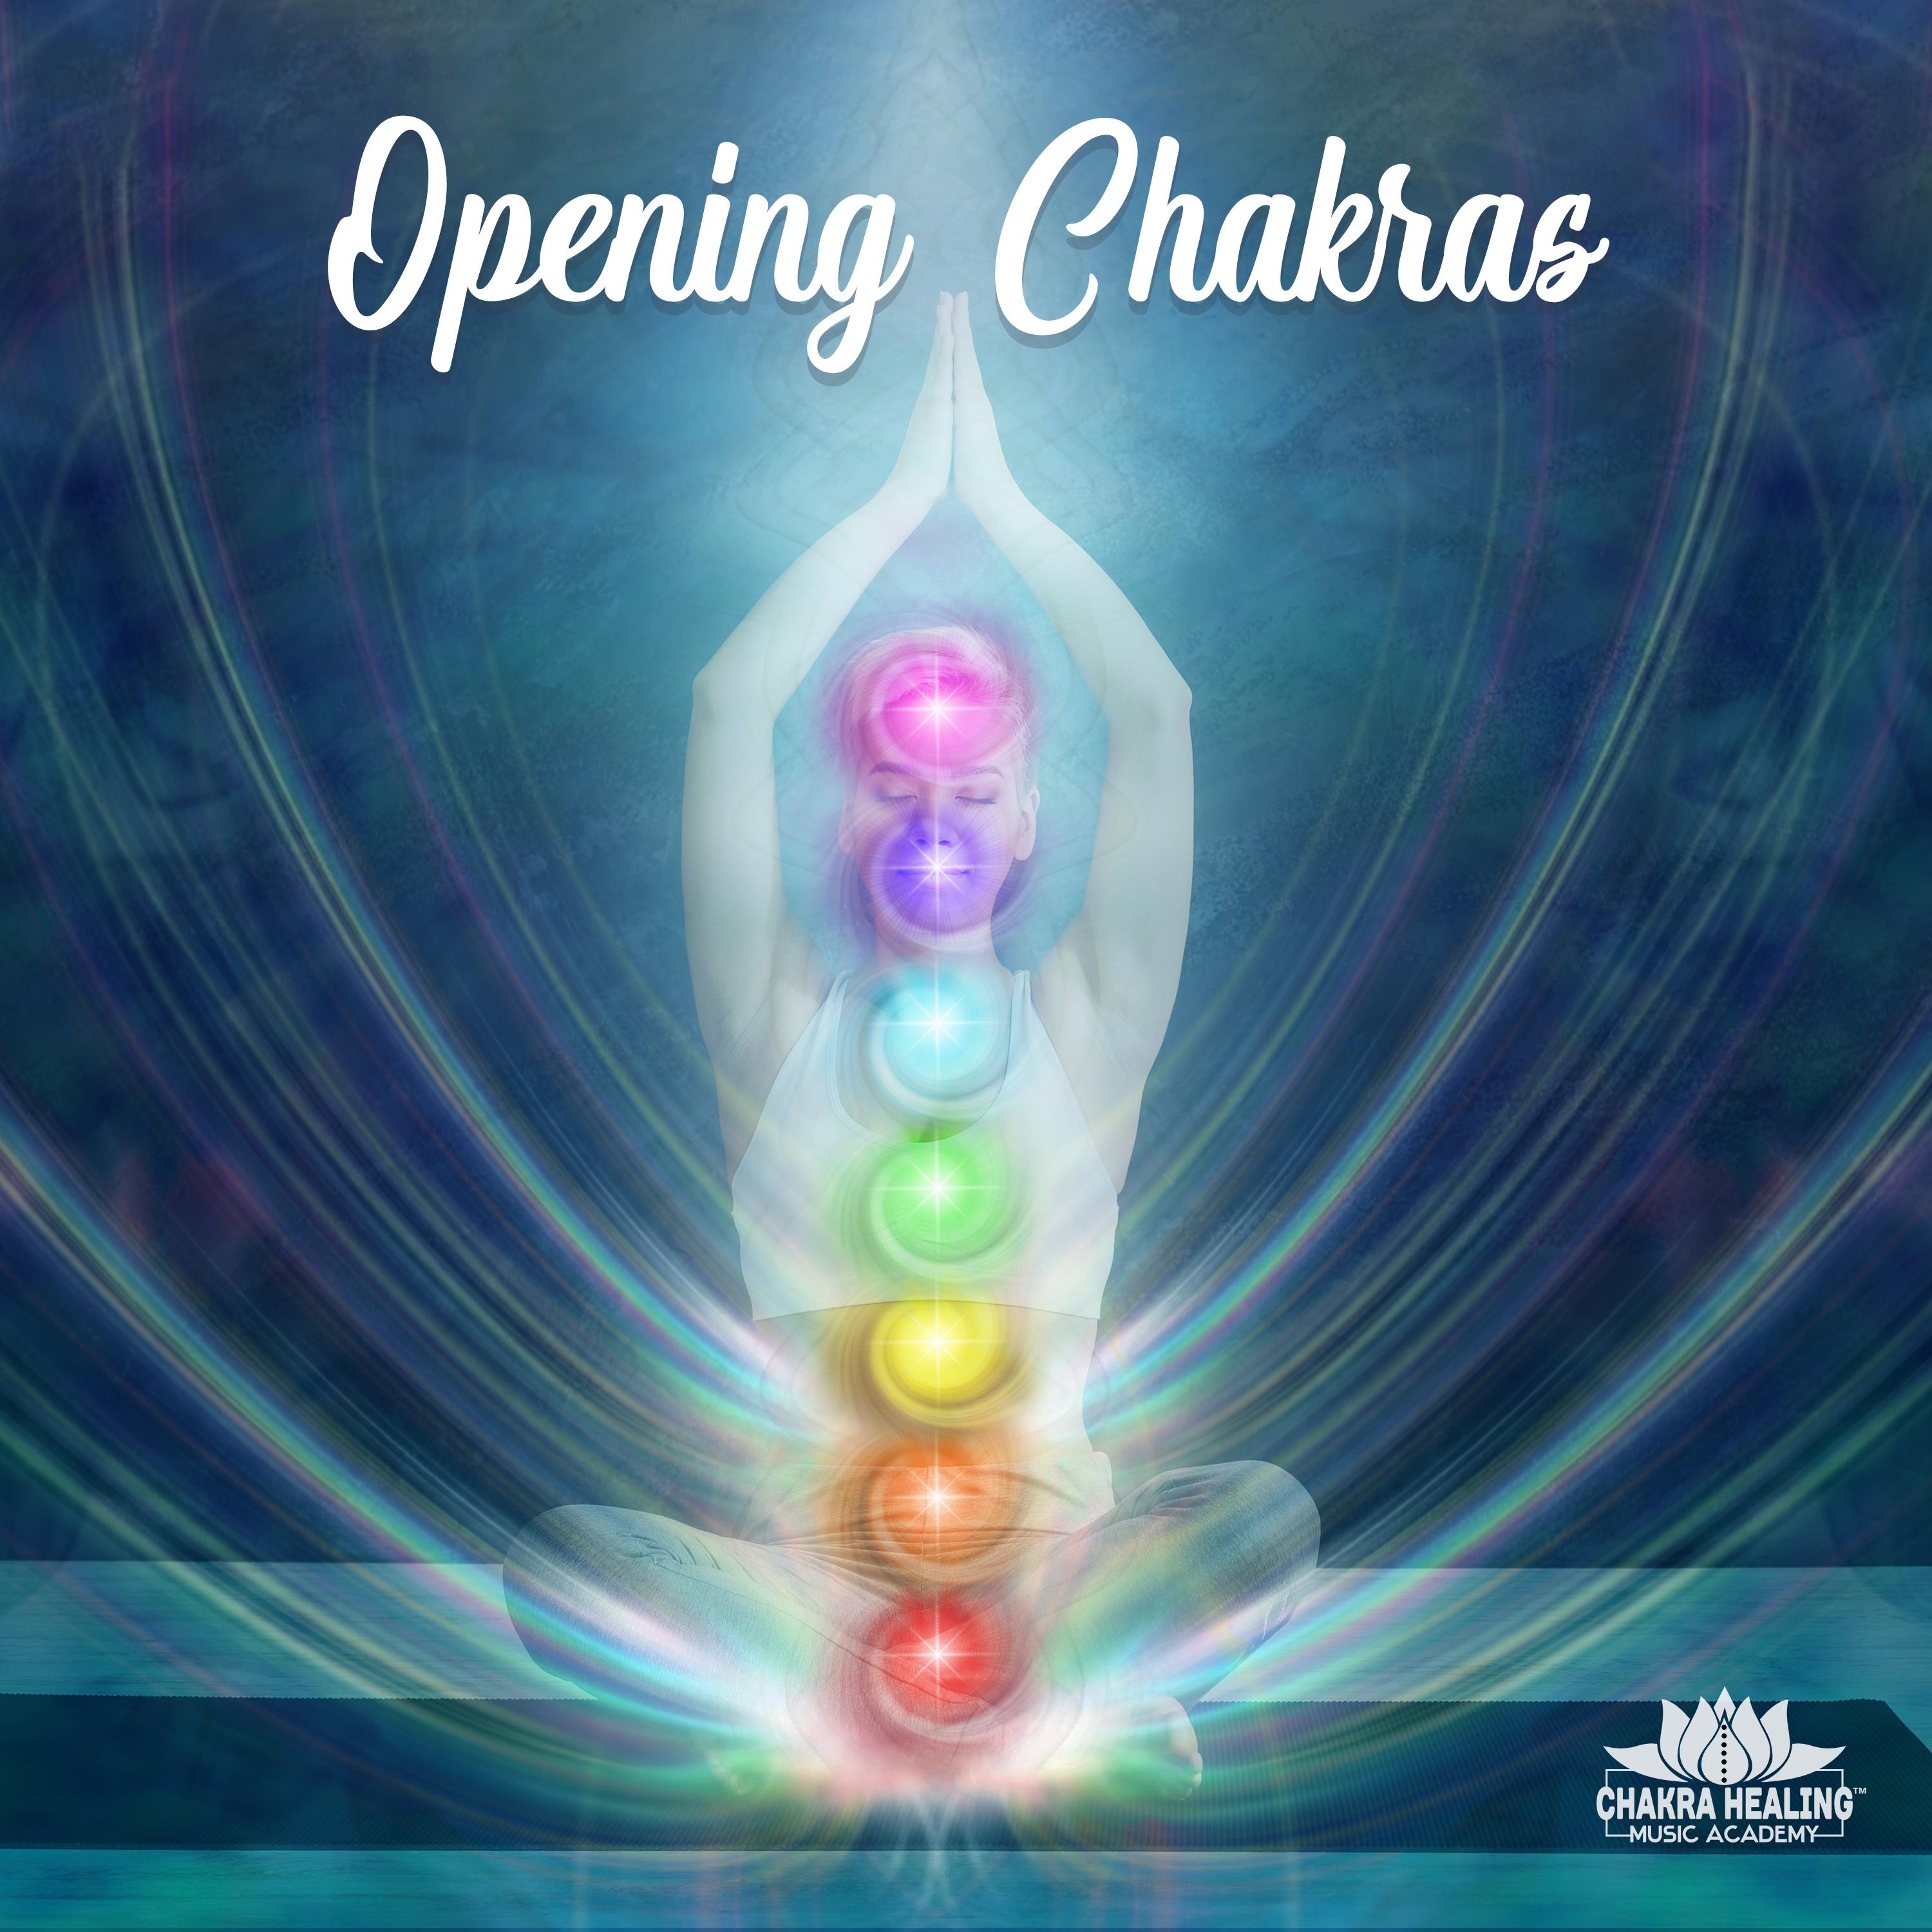 Opening Chakras (Exercises Body and Mind, Balance, Positions Relaxing, Wonderful Moments)